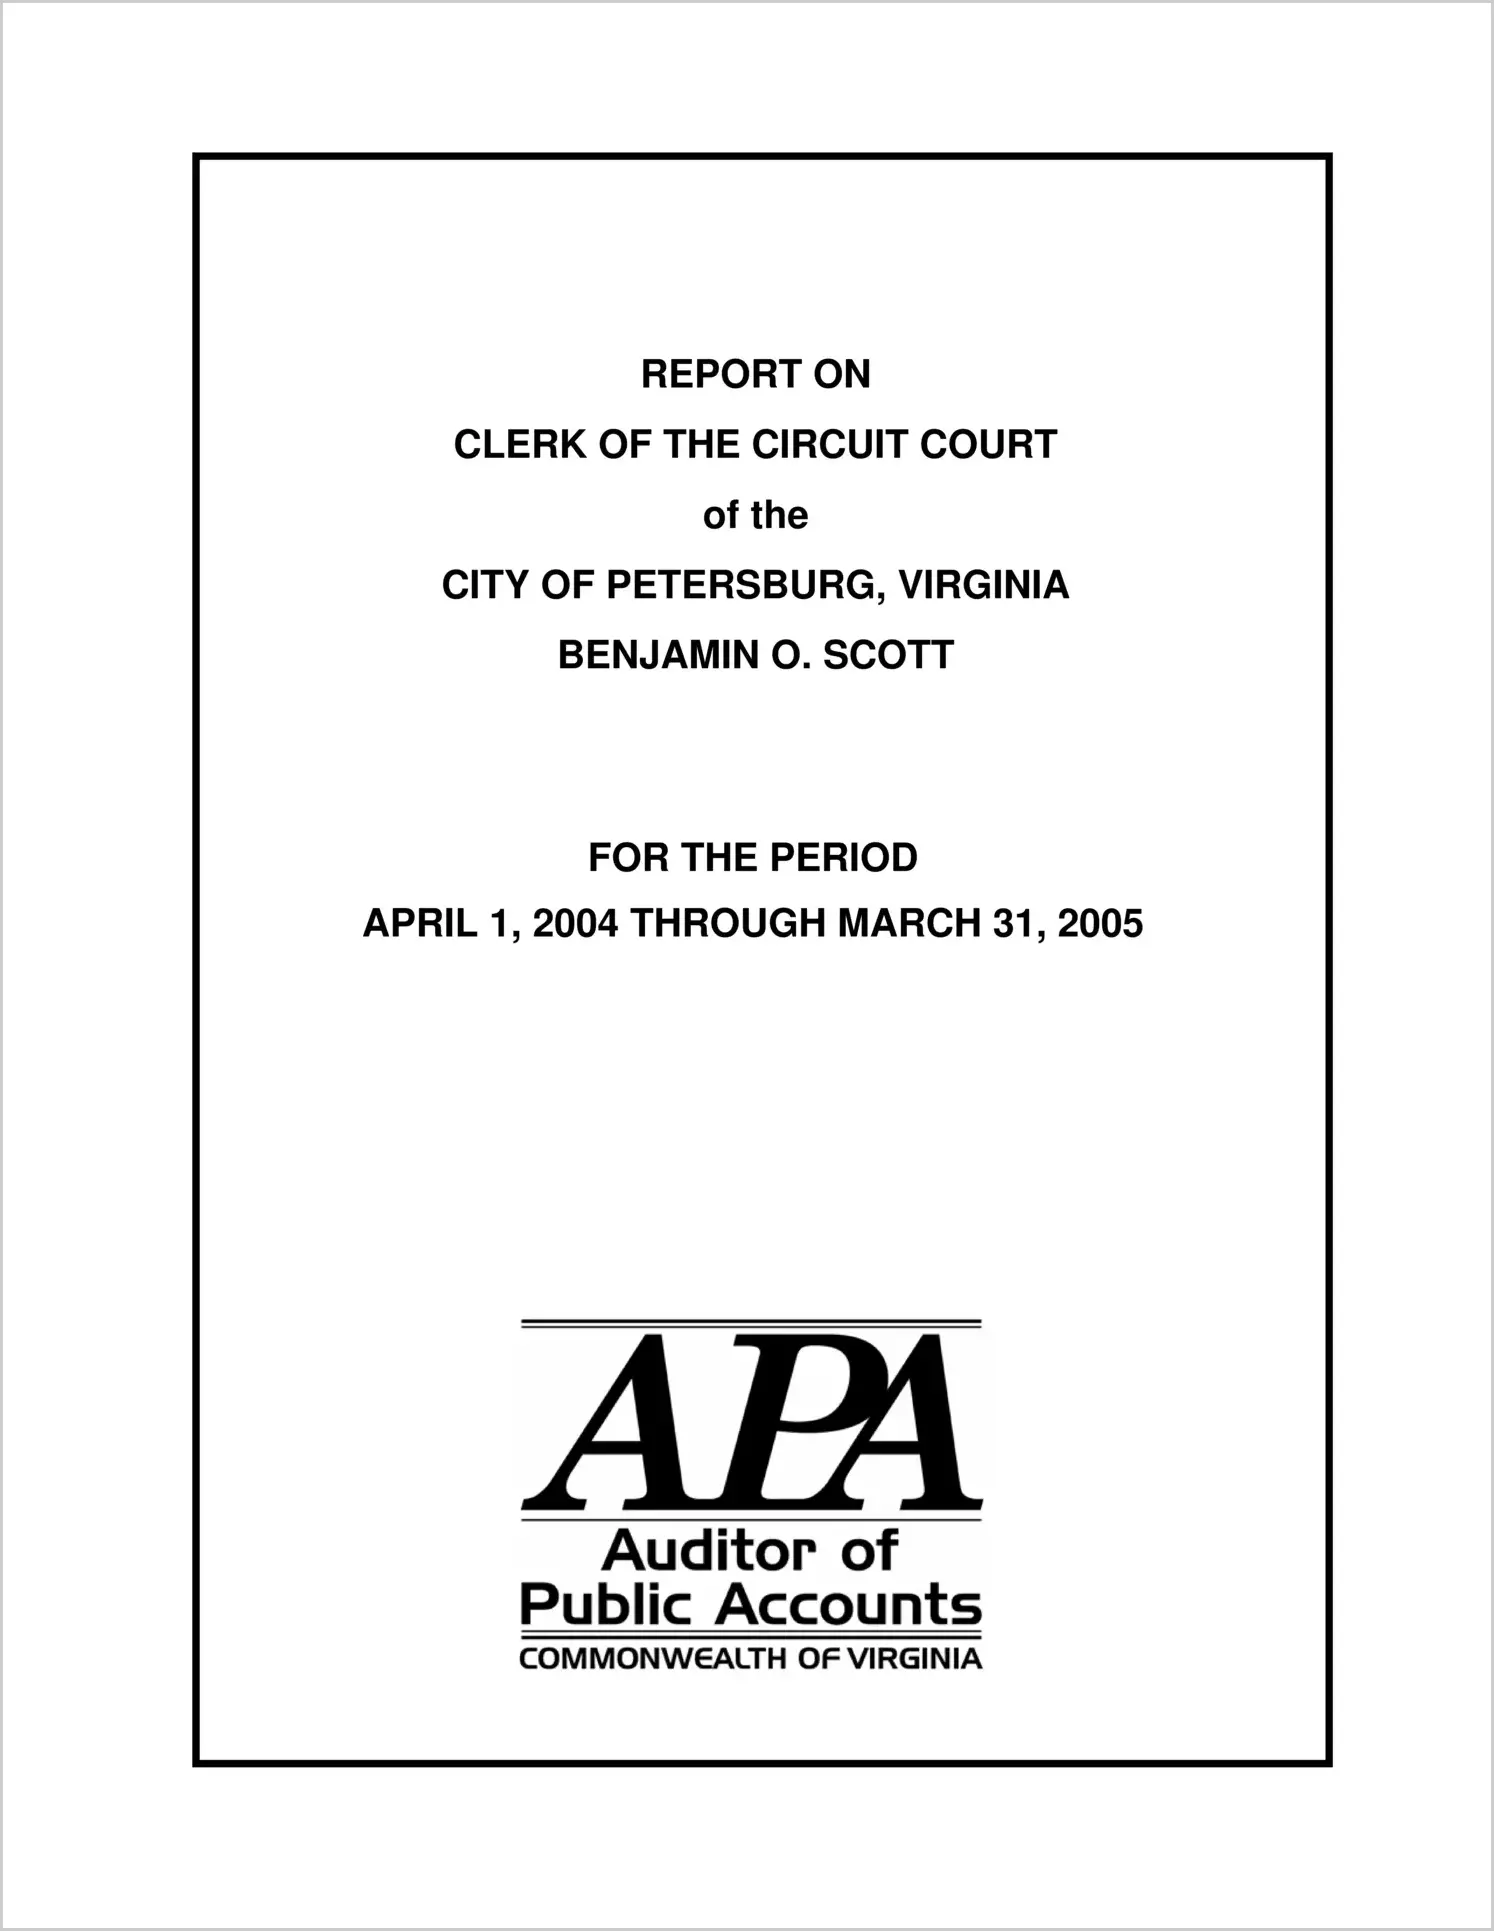 Clerk of the Circuit Court of the City of Petersburg for the period April 1, 2004 through March 31, 2005